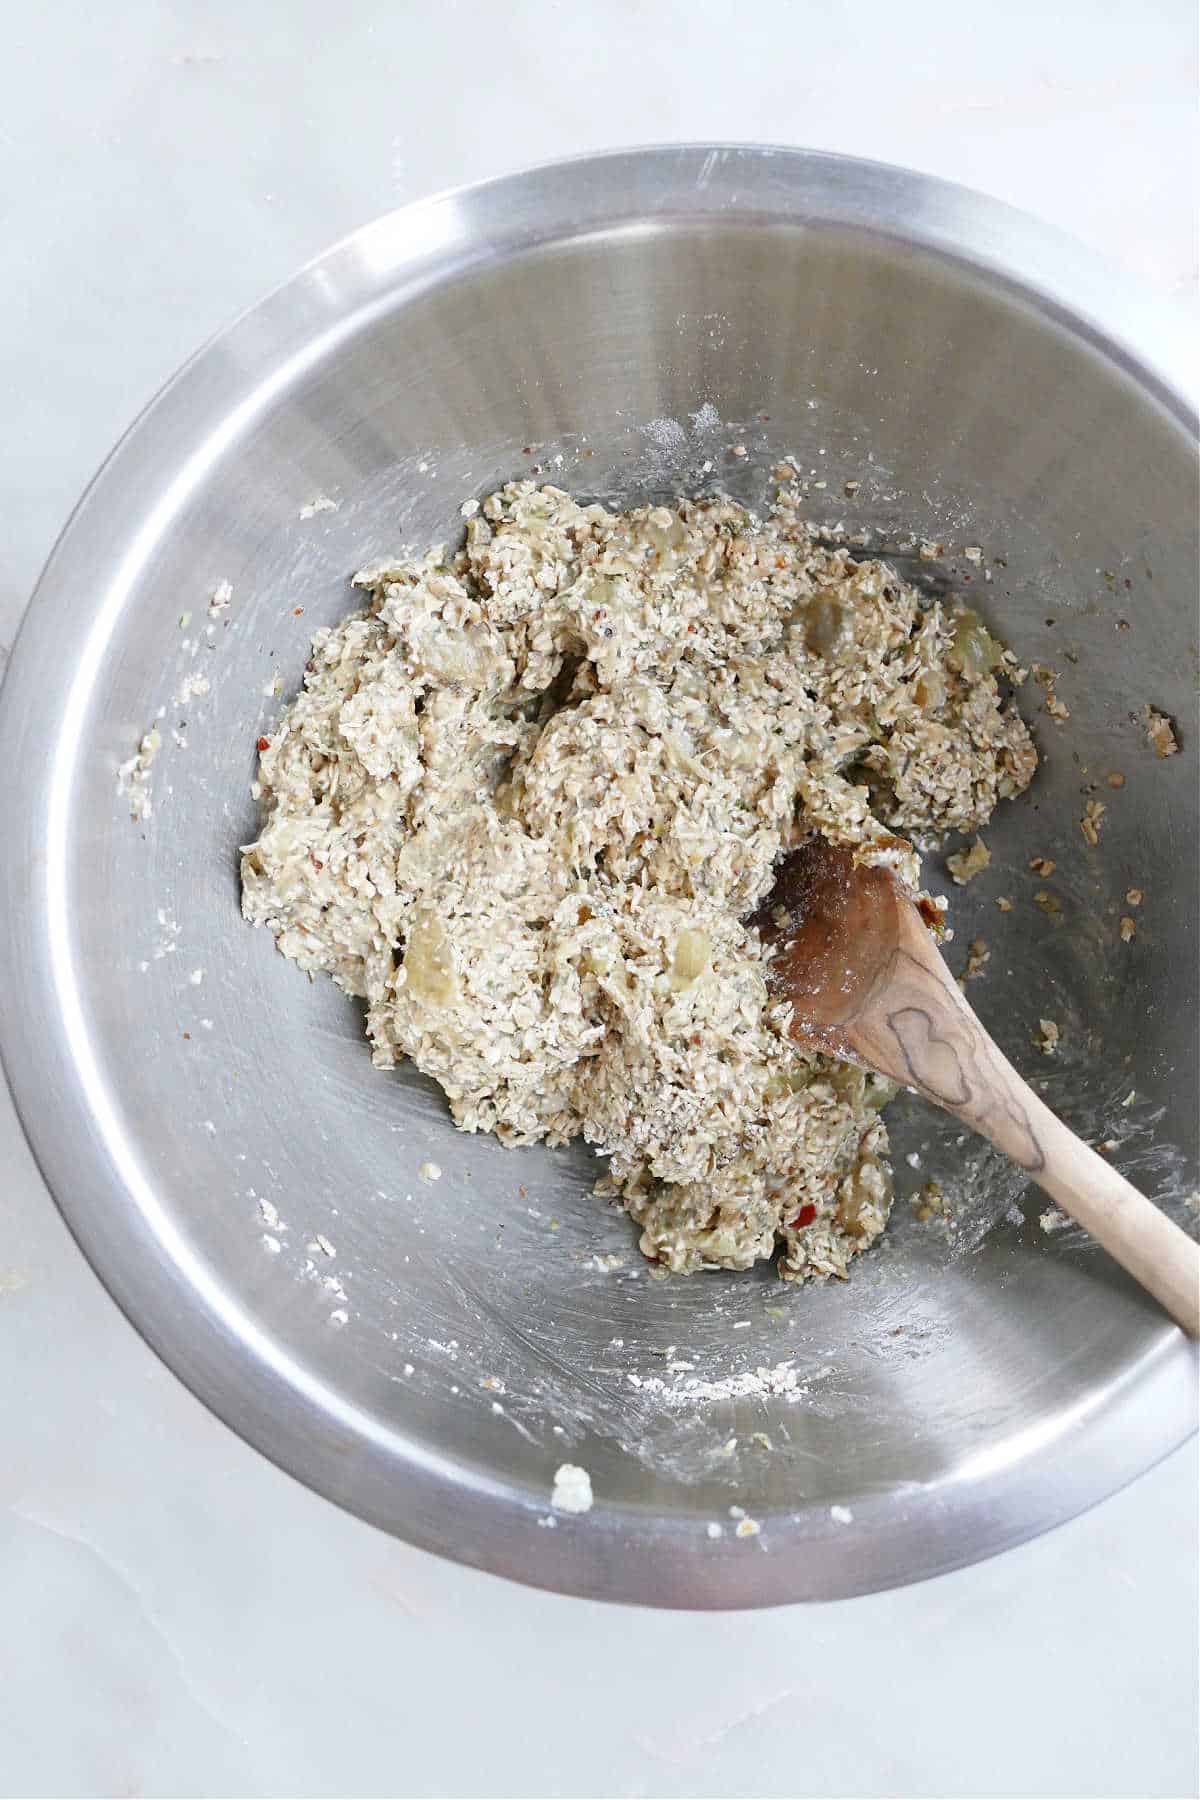 eggplant and oats being mixed together with a wooden spoon in a mixing bowl